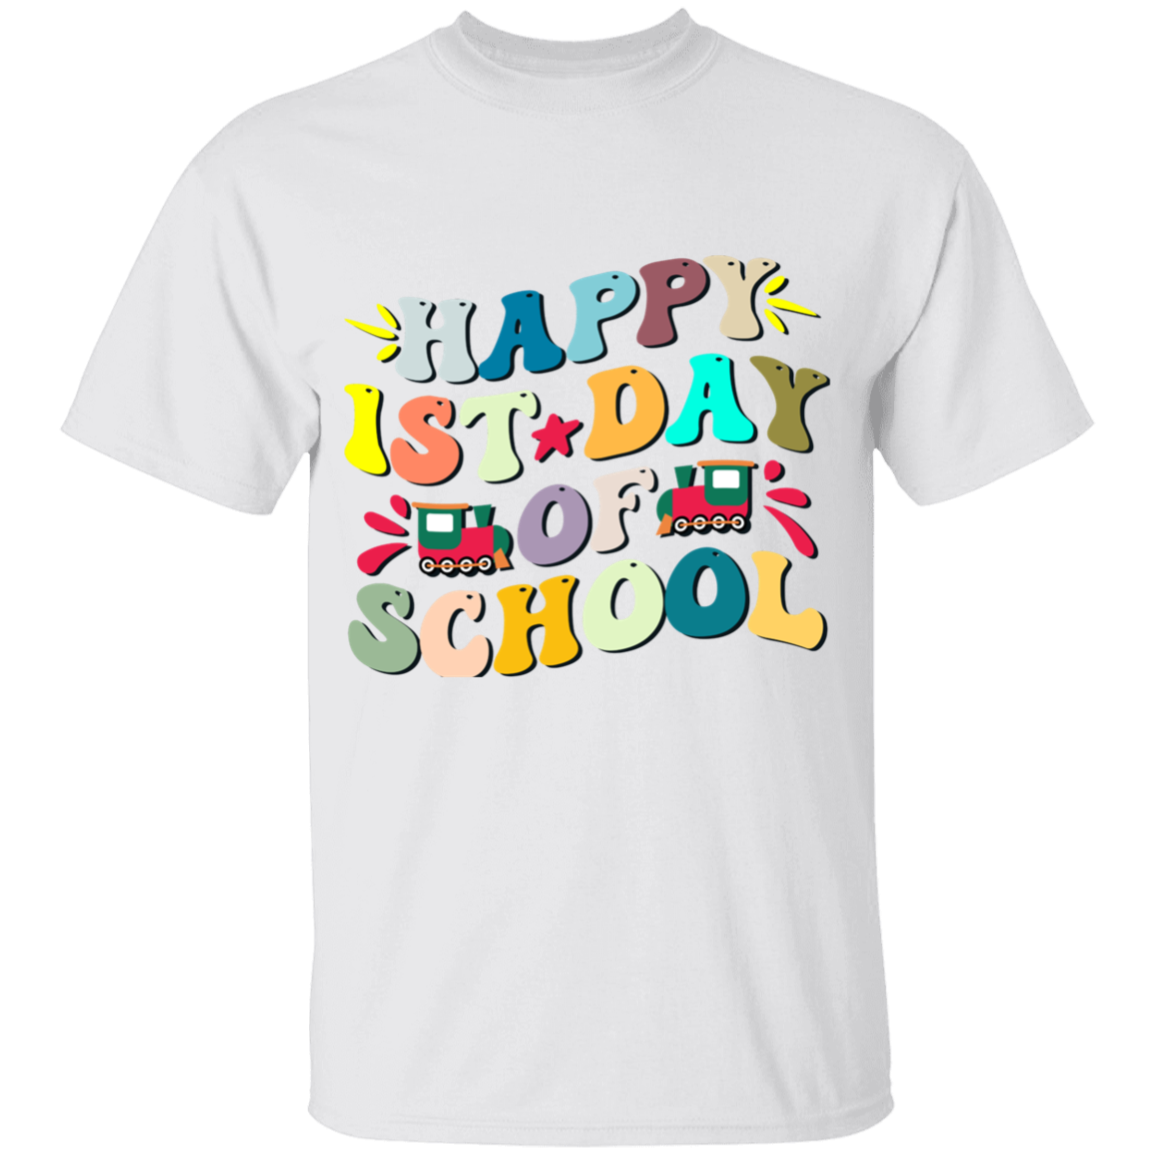 HAPPY 1ST DAY OF SCHOOL 100% COTTON T-SHIRT